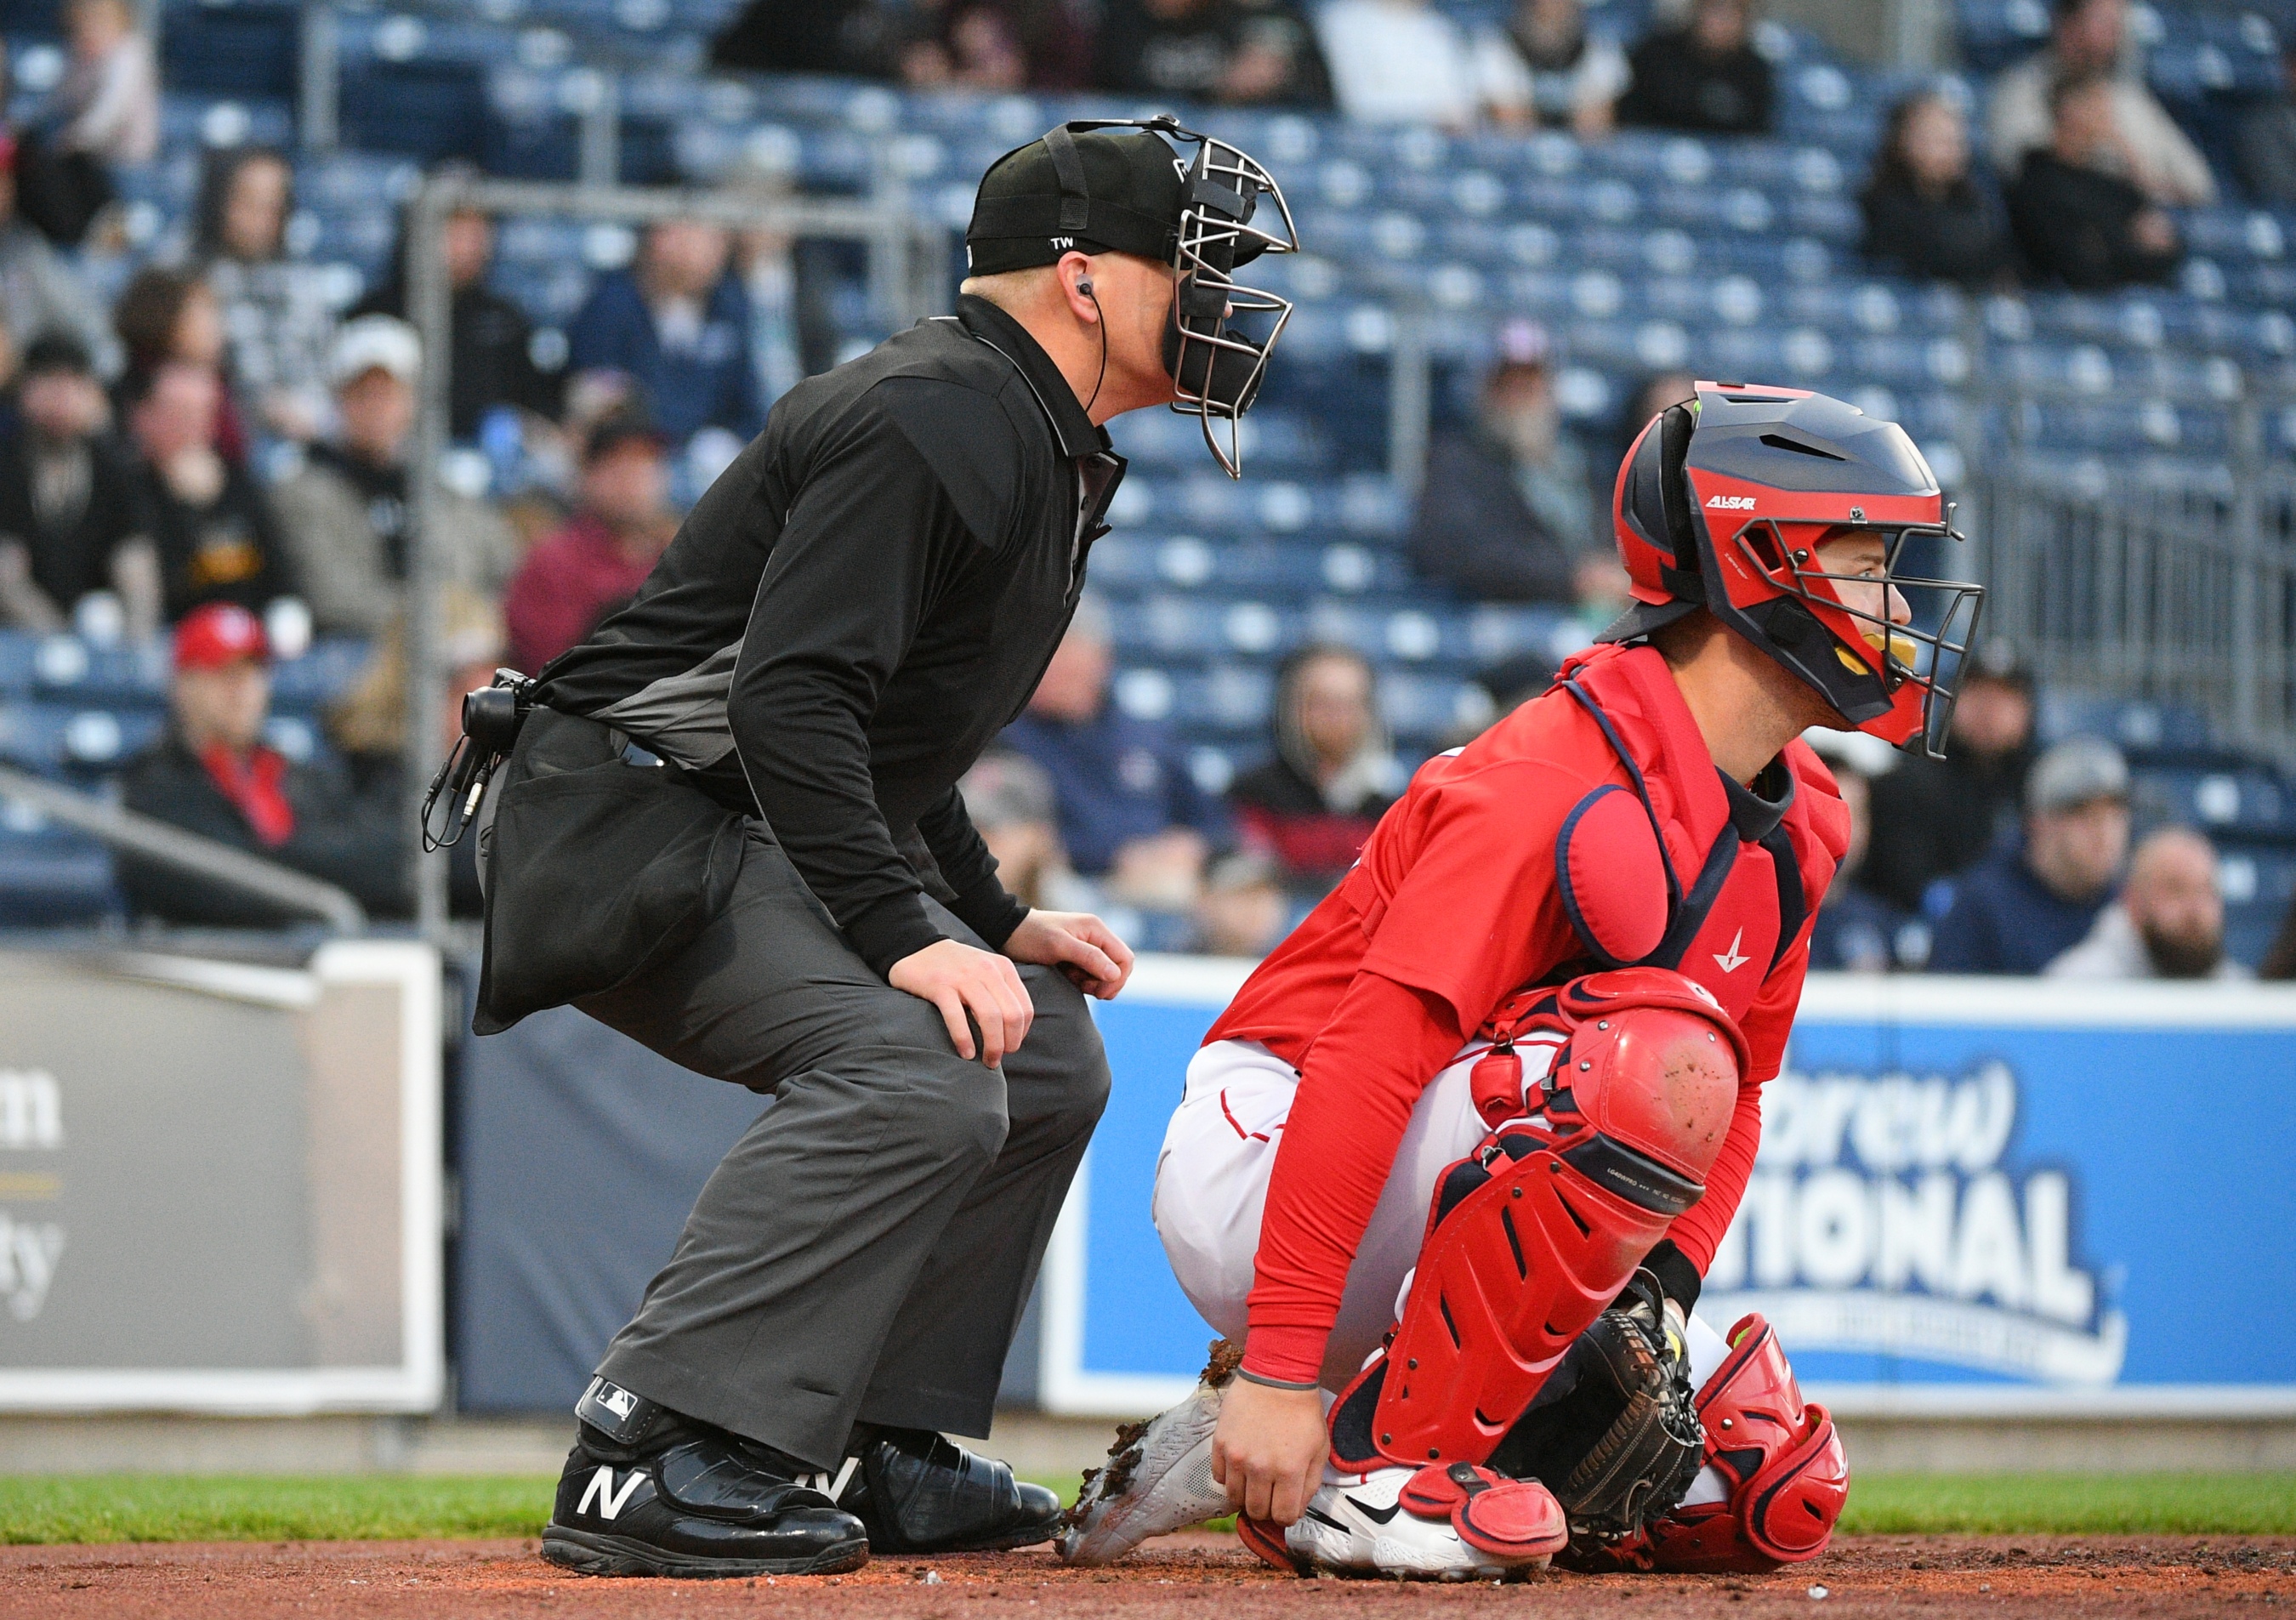 Triple-A pitch data shows the robo-referee’s strike zone didn’t work as hoped